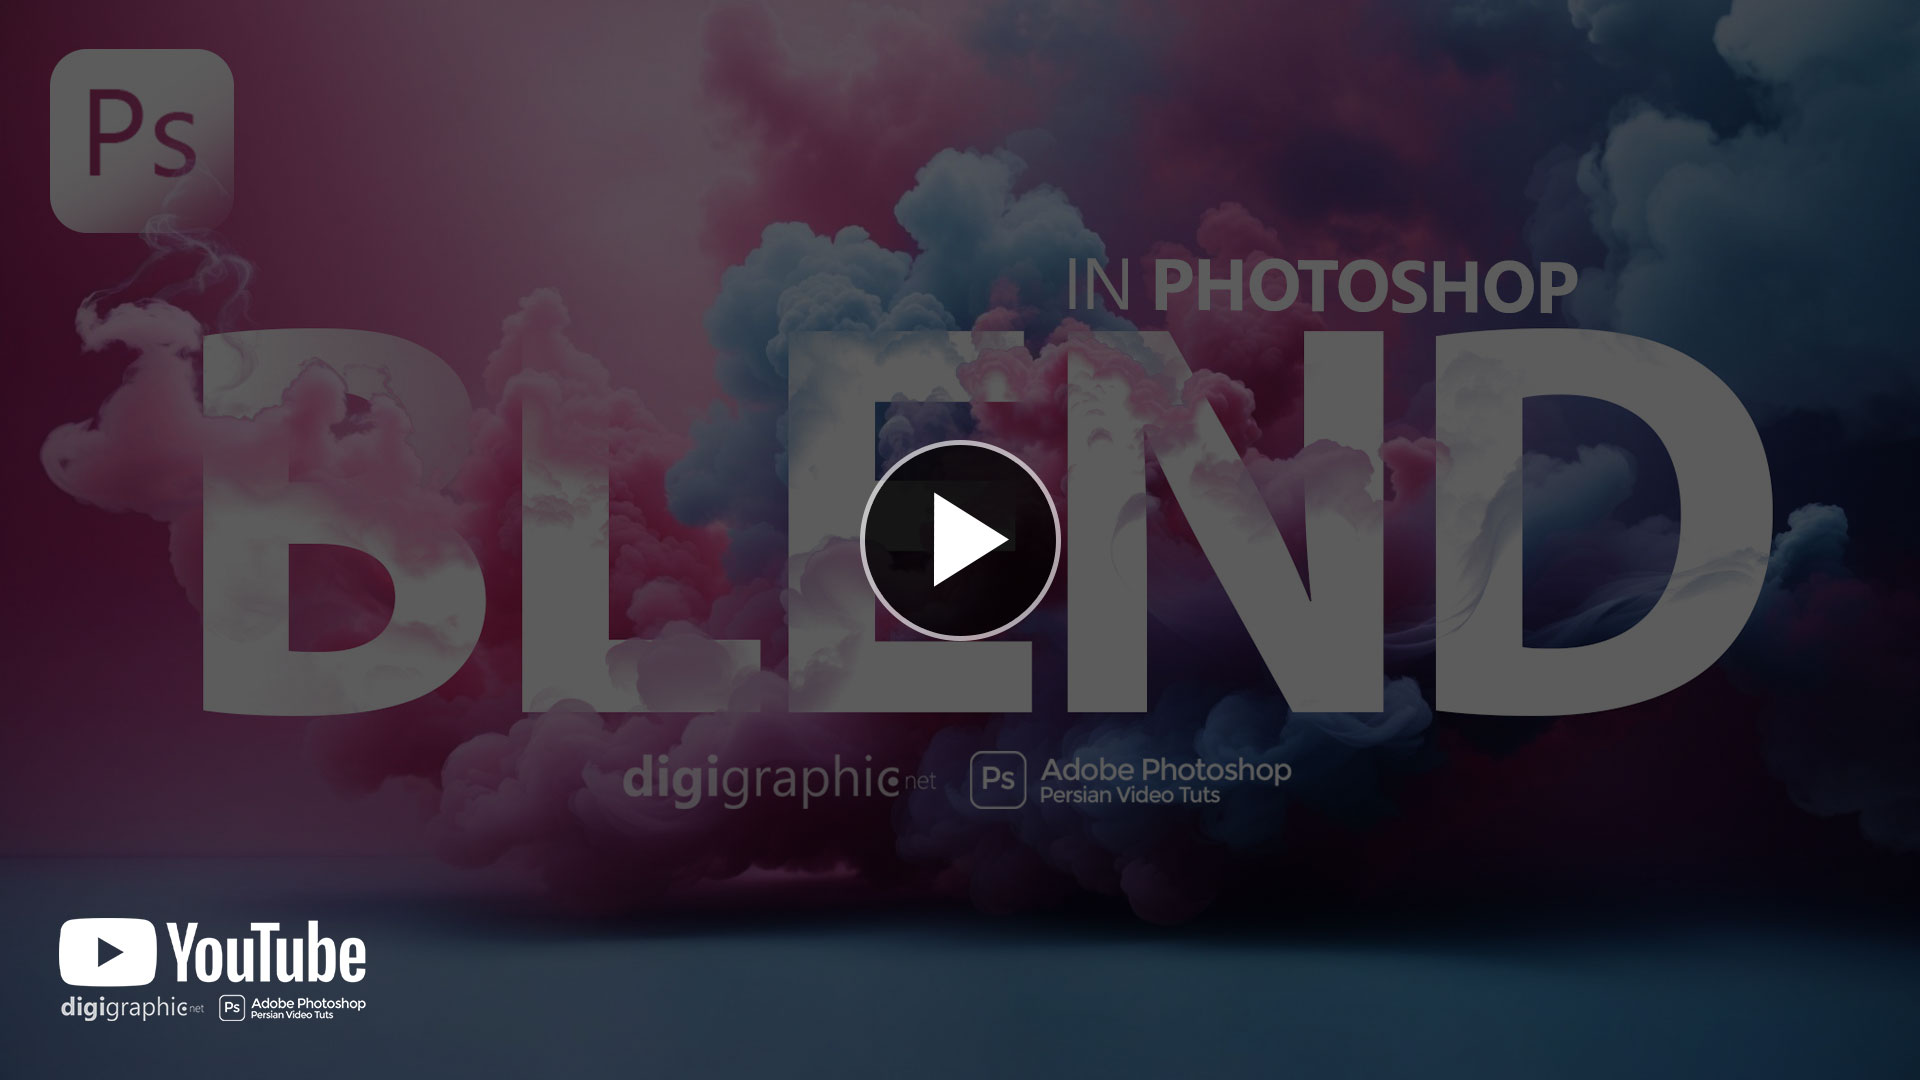 Blend Text in Photoshop - Photoshop Blending Options